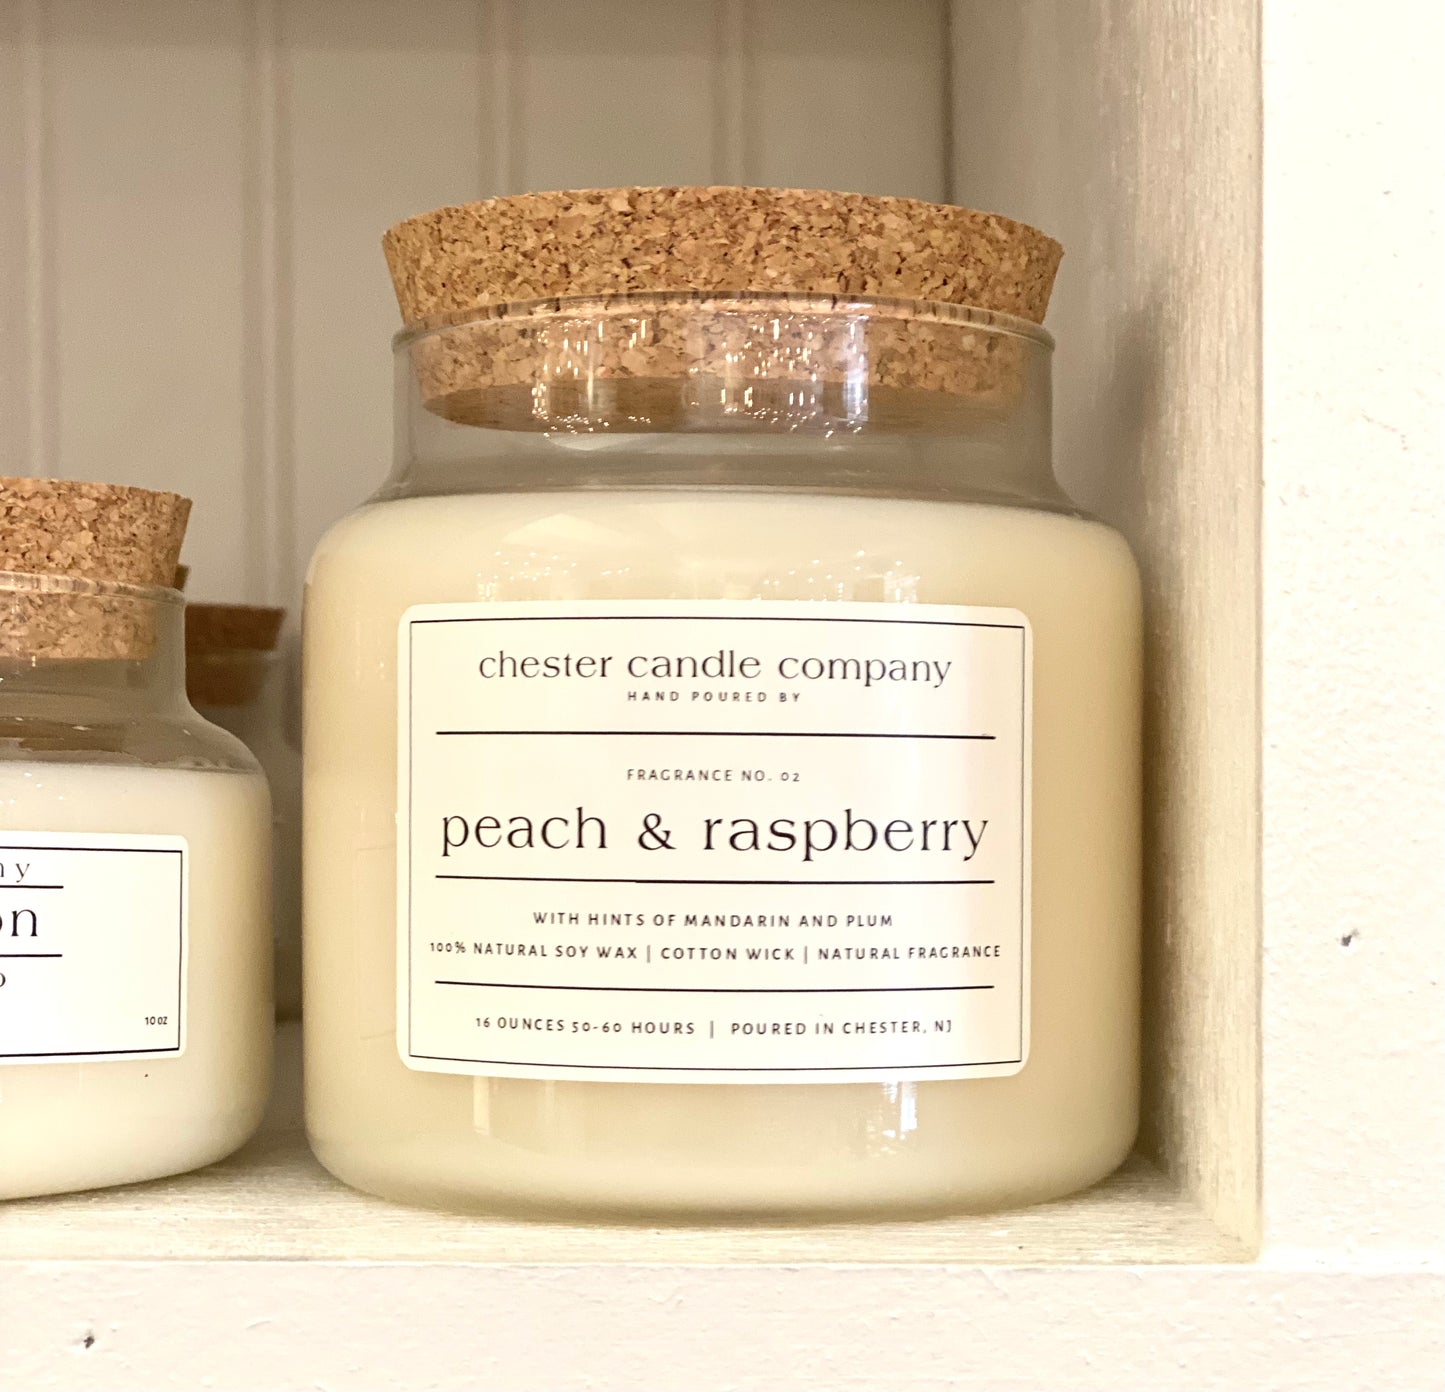 Natural Soy Wax Candle in a Clear Glass Apothecary-Style Jar and a Cork Lid. White Label on the Jar Reads "chester candle company. Fragrance No. 02. peach & raspberry with hints of mandarin and plum. 100% Natural Soy Wax, Cotton Wick, Natural Fragrance. 16 ounces 50-60 hours. Poured in Chester, NJ”